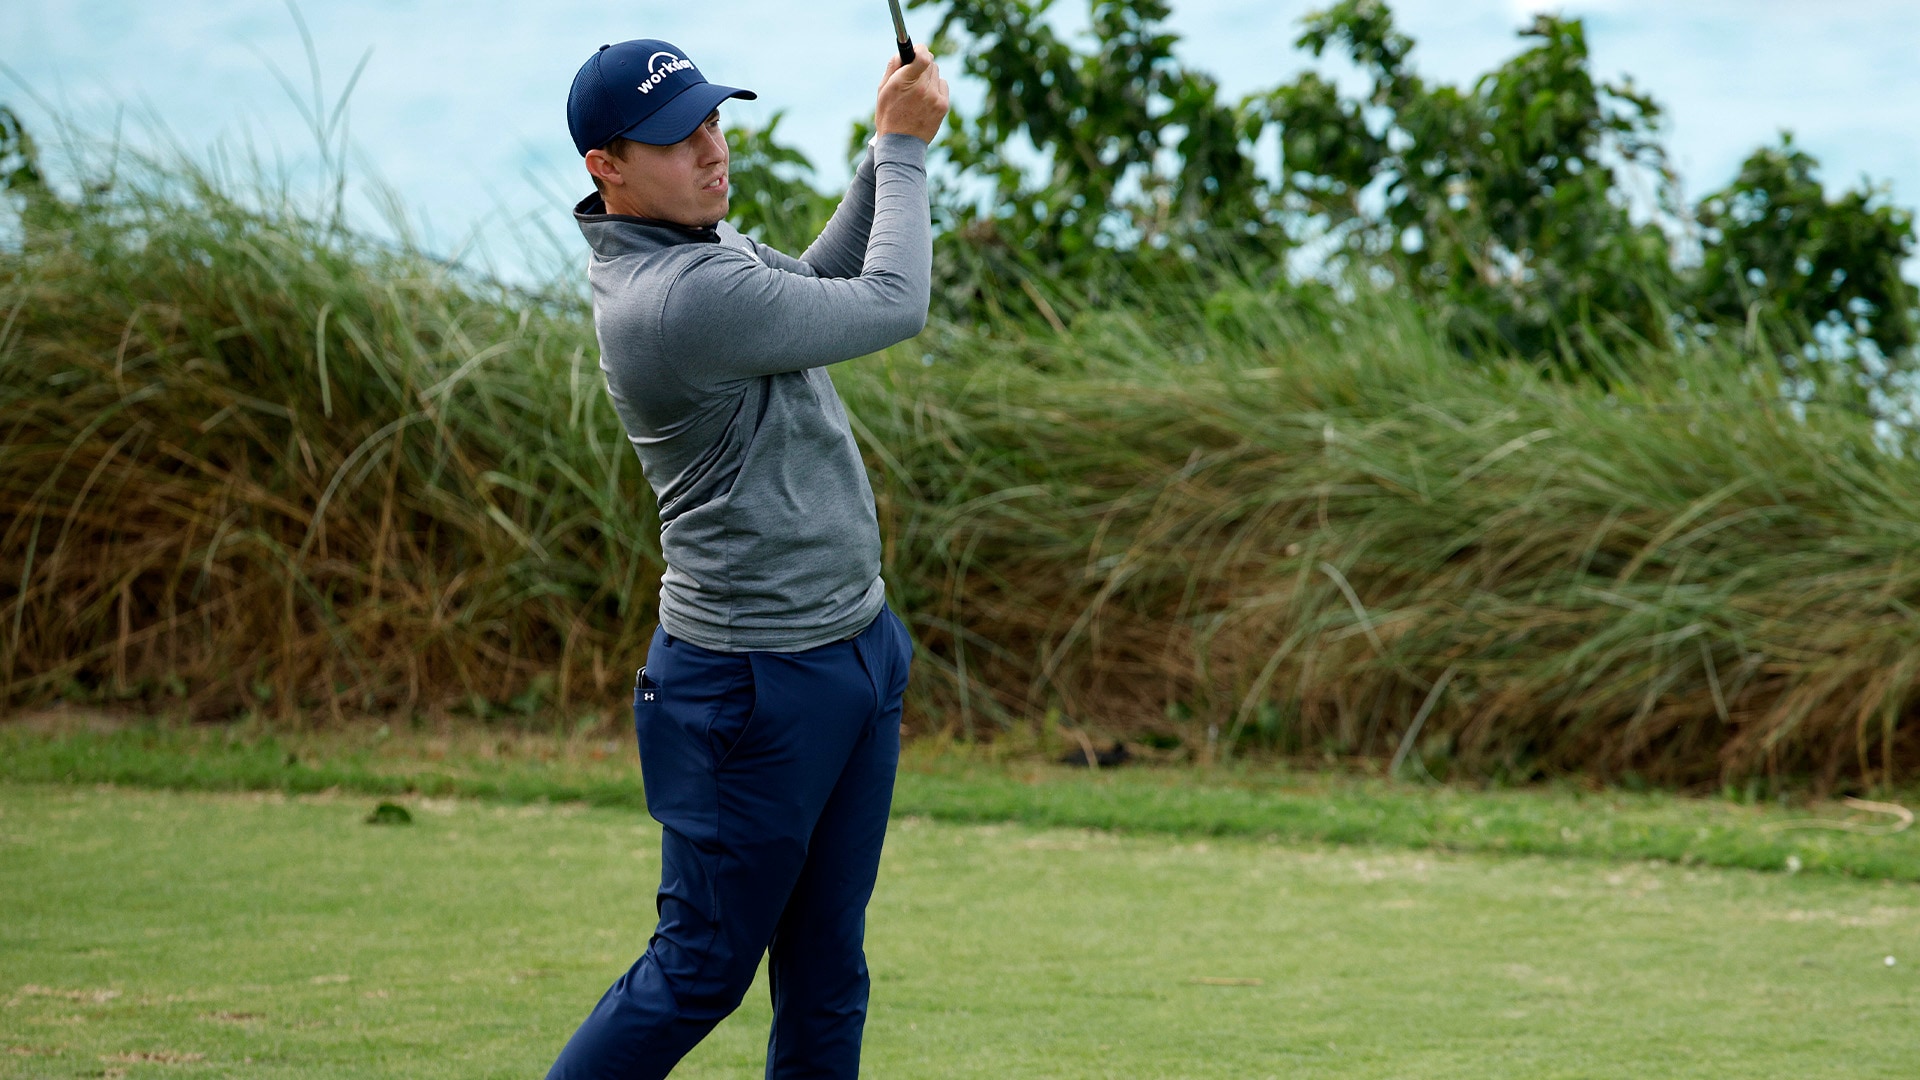 Matthew Fitzpatrick, Russell Knox agree: Strongest wind they ever played in